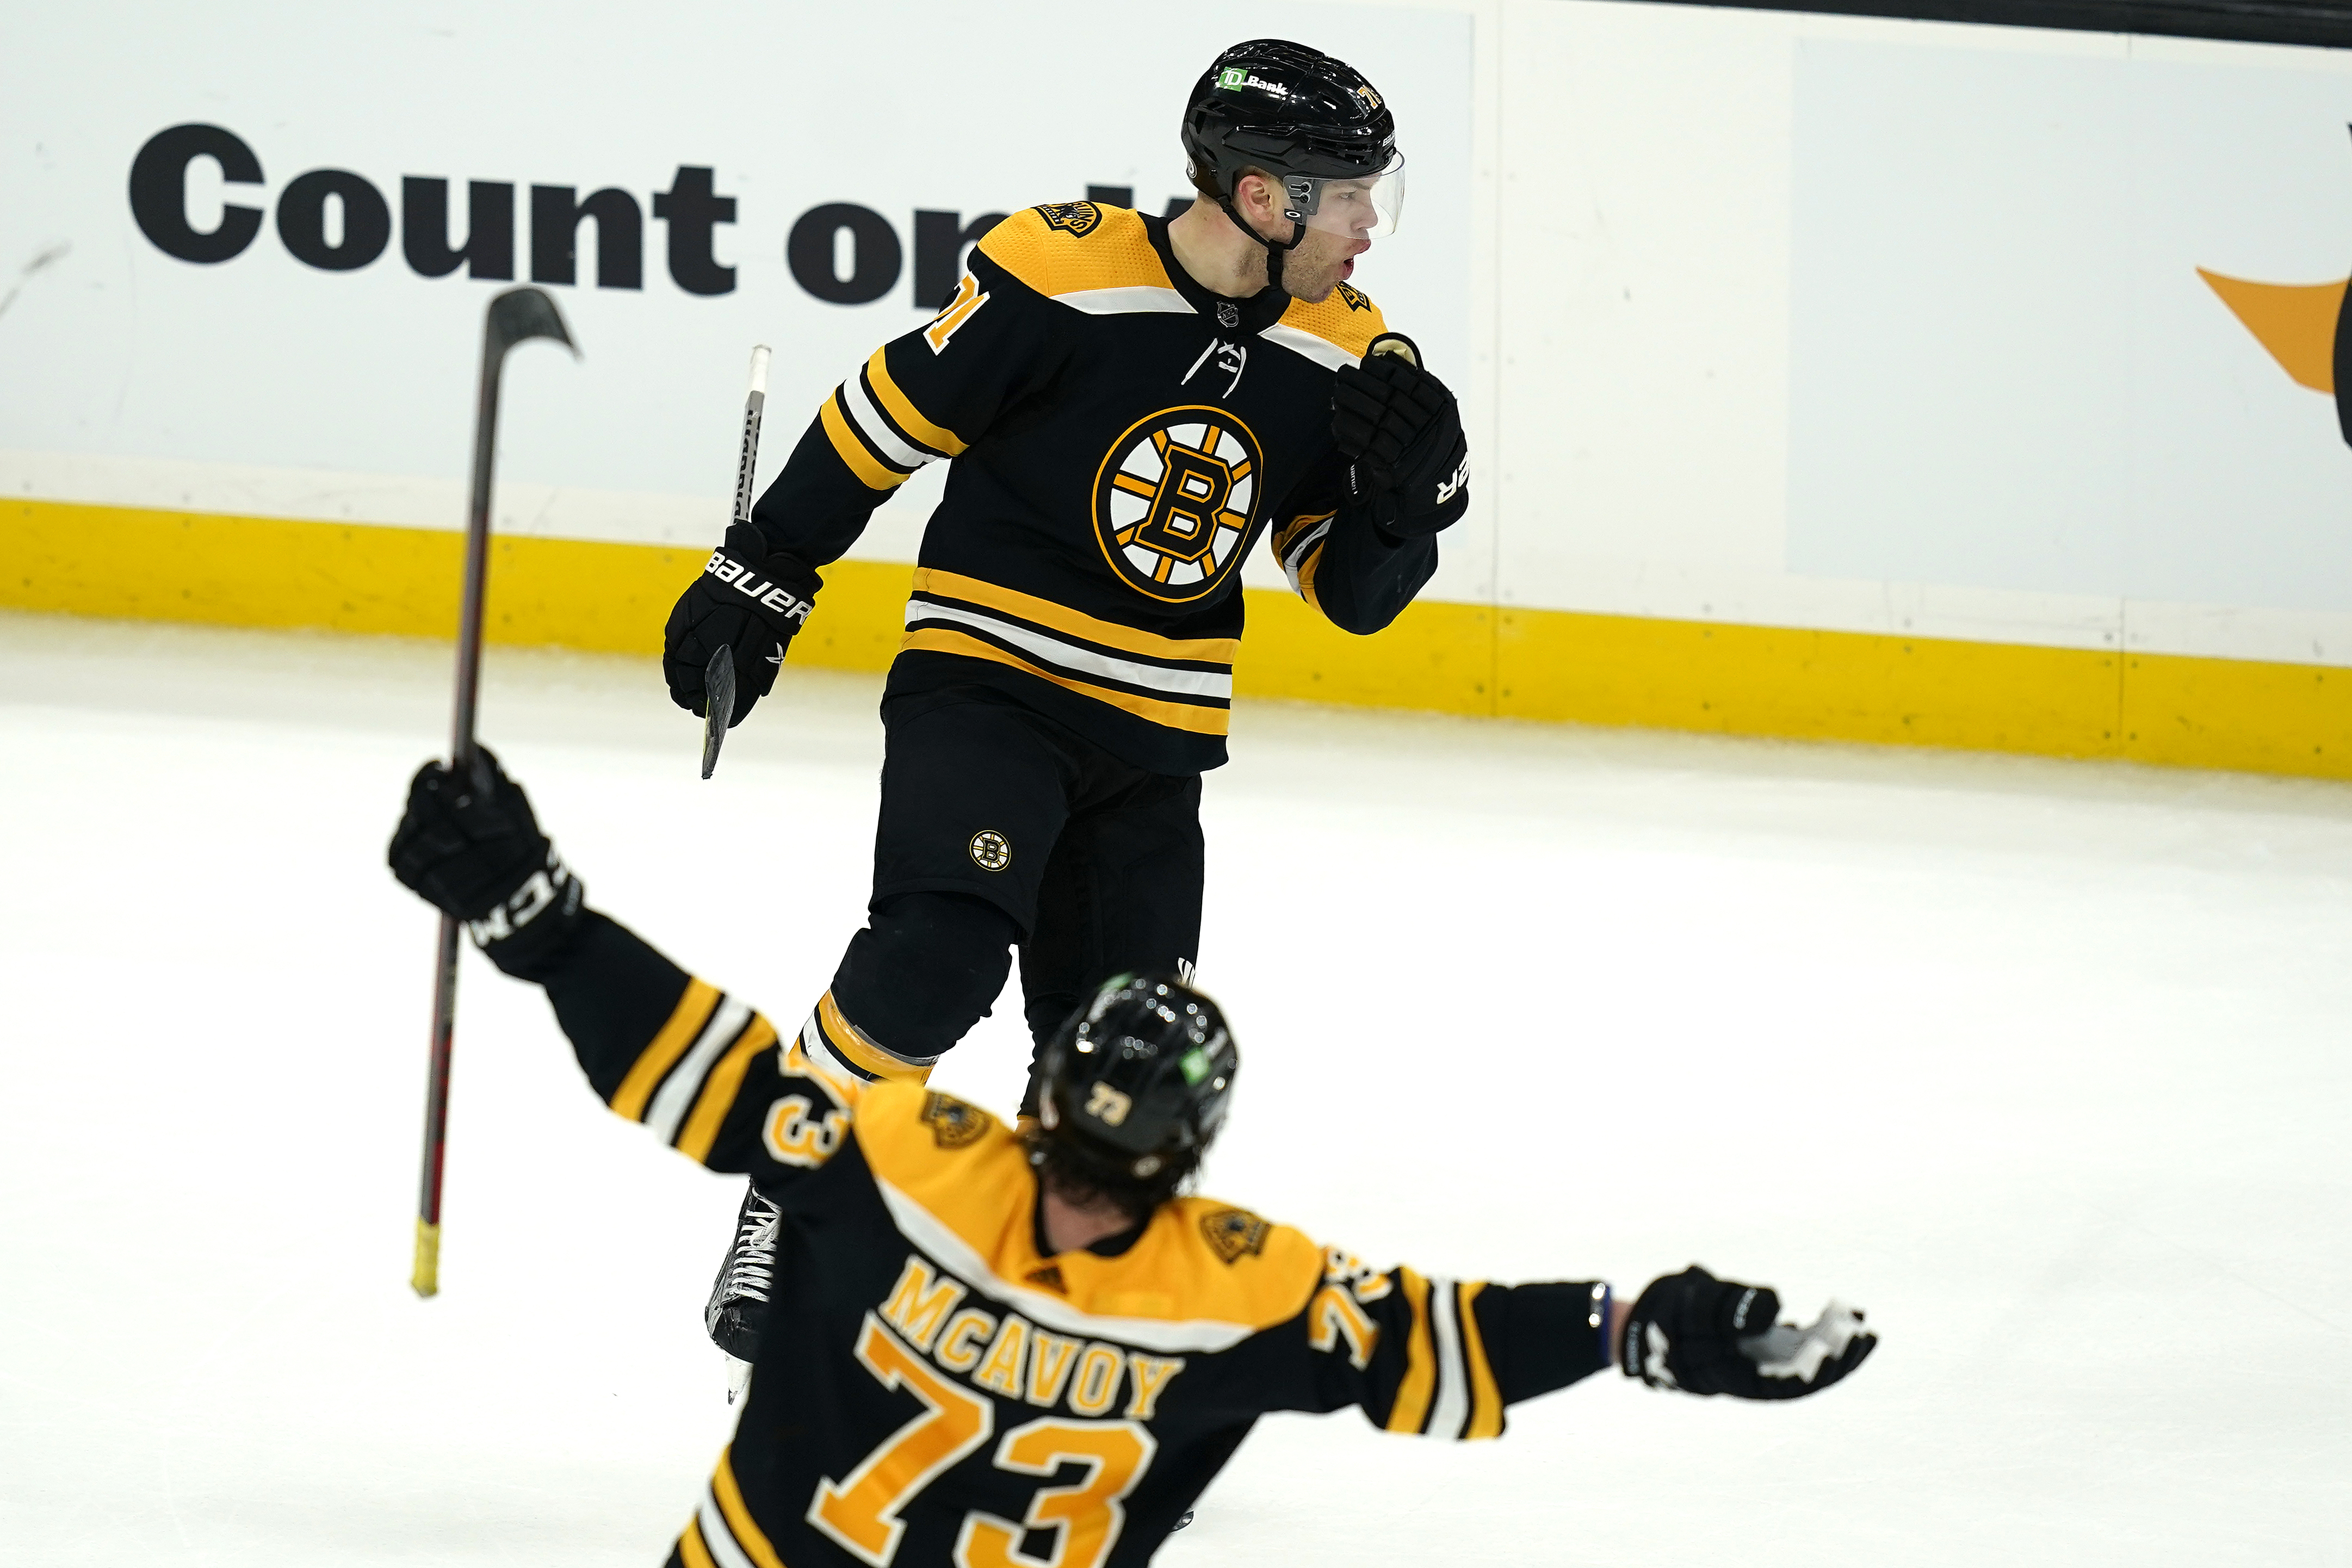 Charlie McAvoy of the Boston Bruins skates against against the New